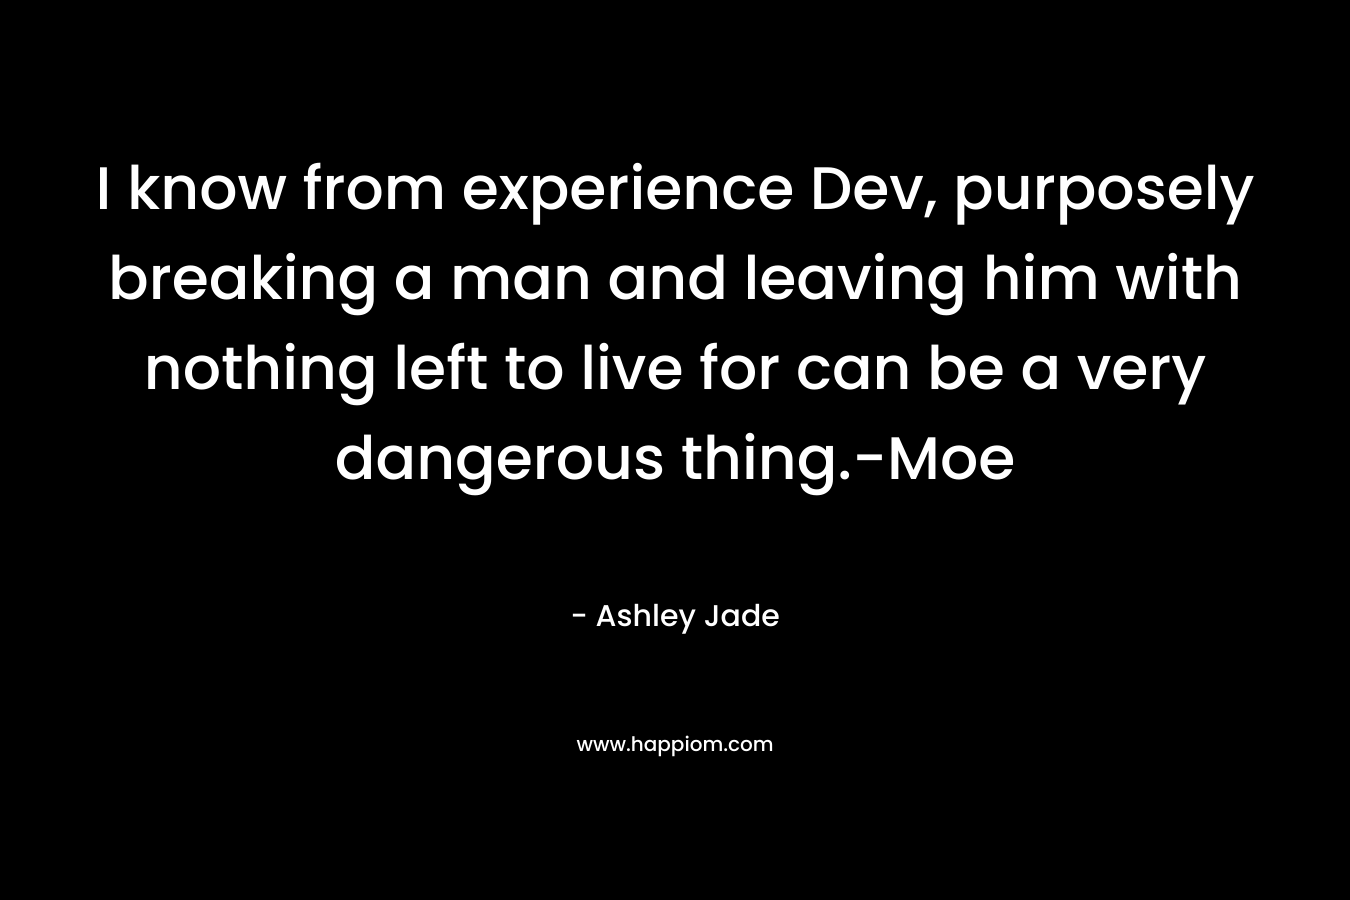 I know from experience Dev, purposely breaking a man and leaving him with nothing left to live for can be a very dangerous thing.-Moe